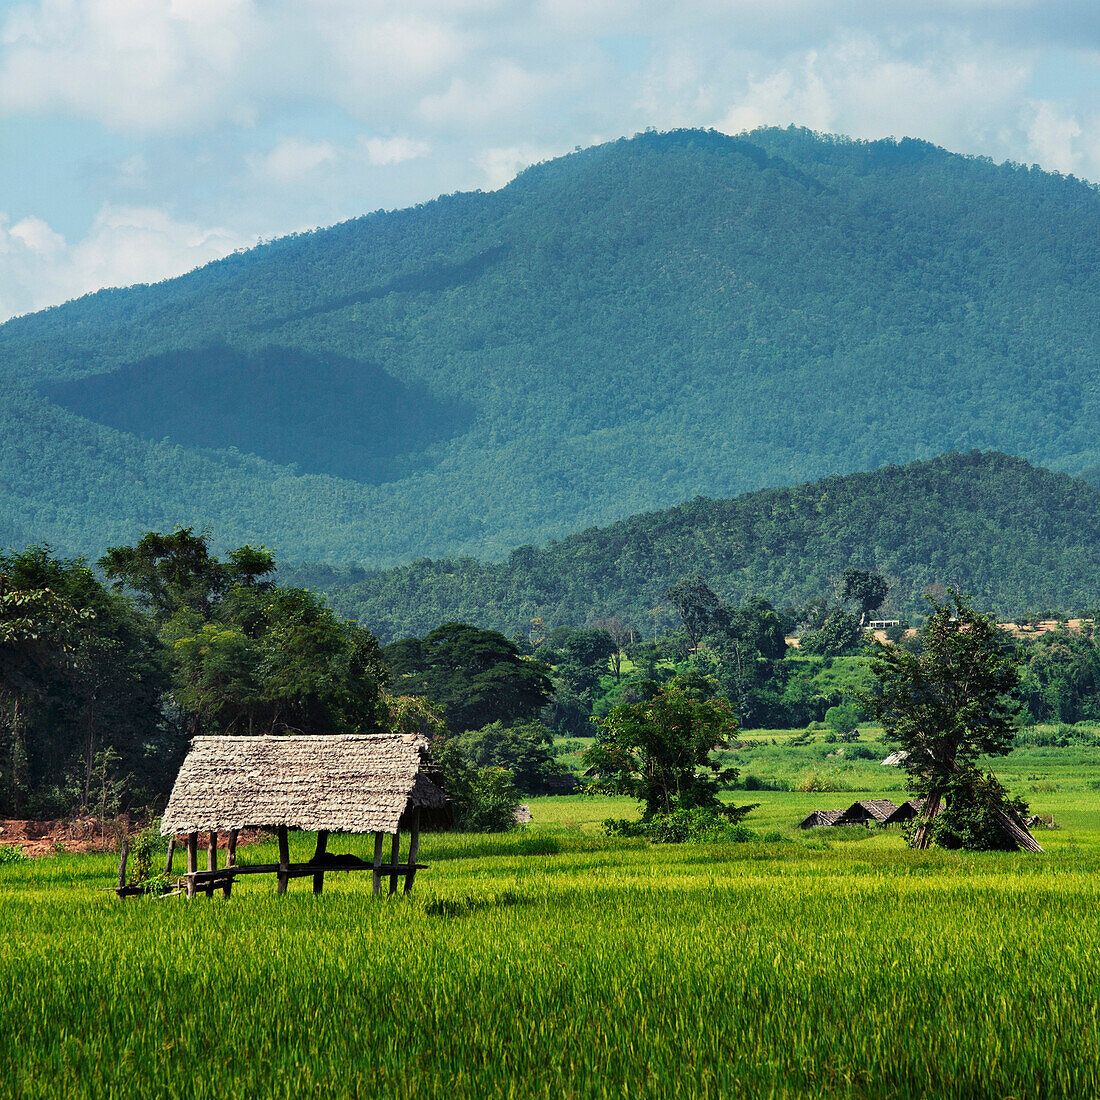 'A Wooden Shelter In A Mountainous Area; Mae Hia, Chiang Mai Province, Thailand'